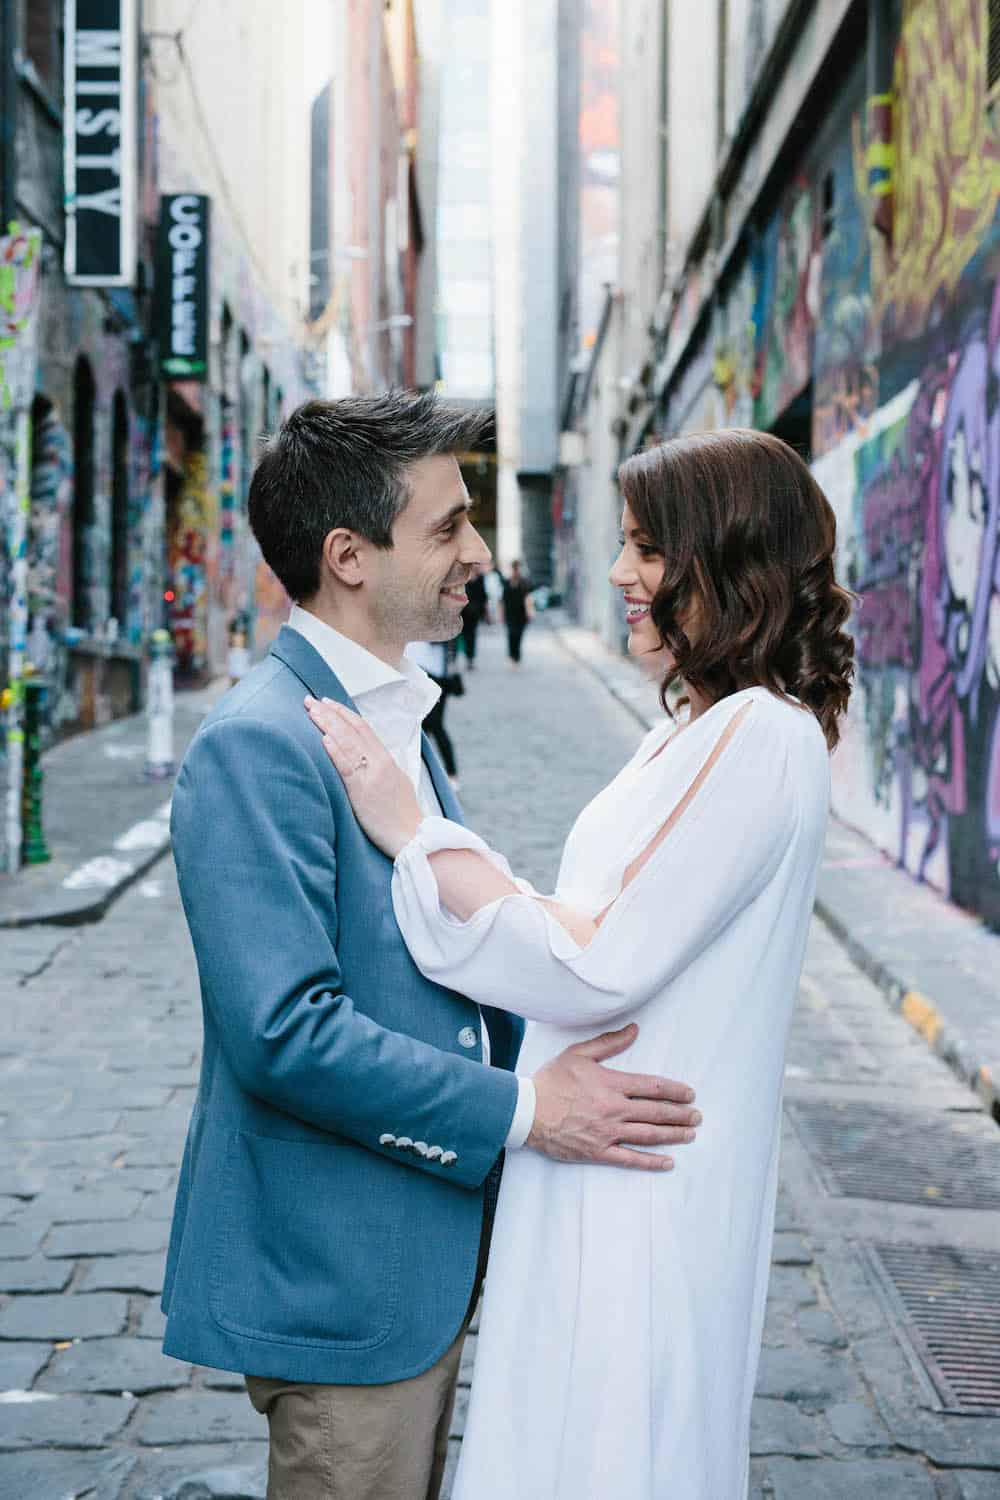 Engagement Photographer Melbourne Graffiti Walk Hosier Lane and Hardware Lane Engagement Shoot with Quila and Dave 2